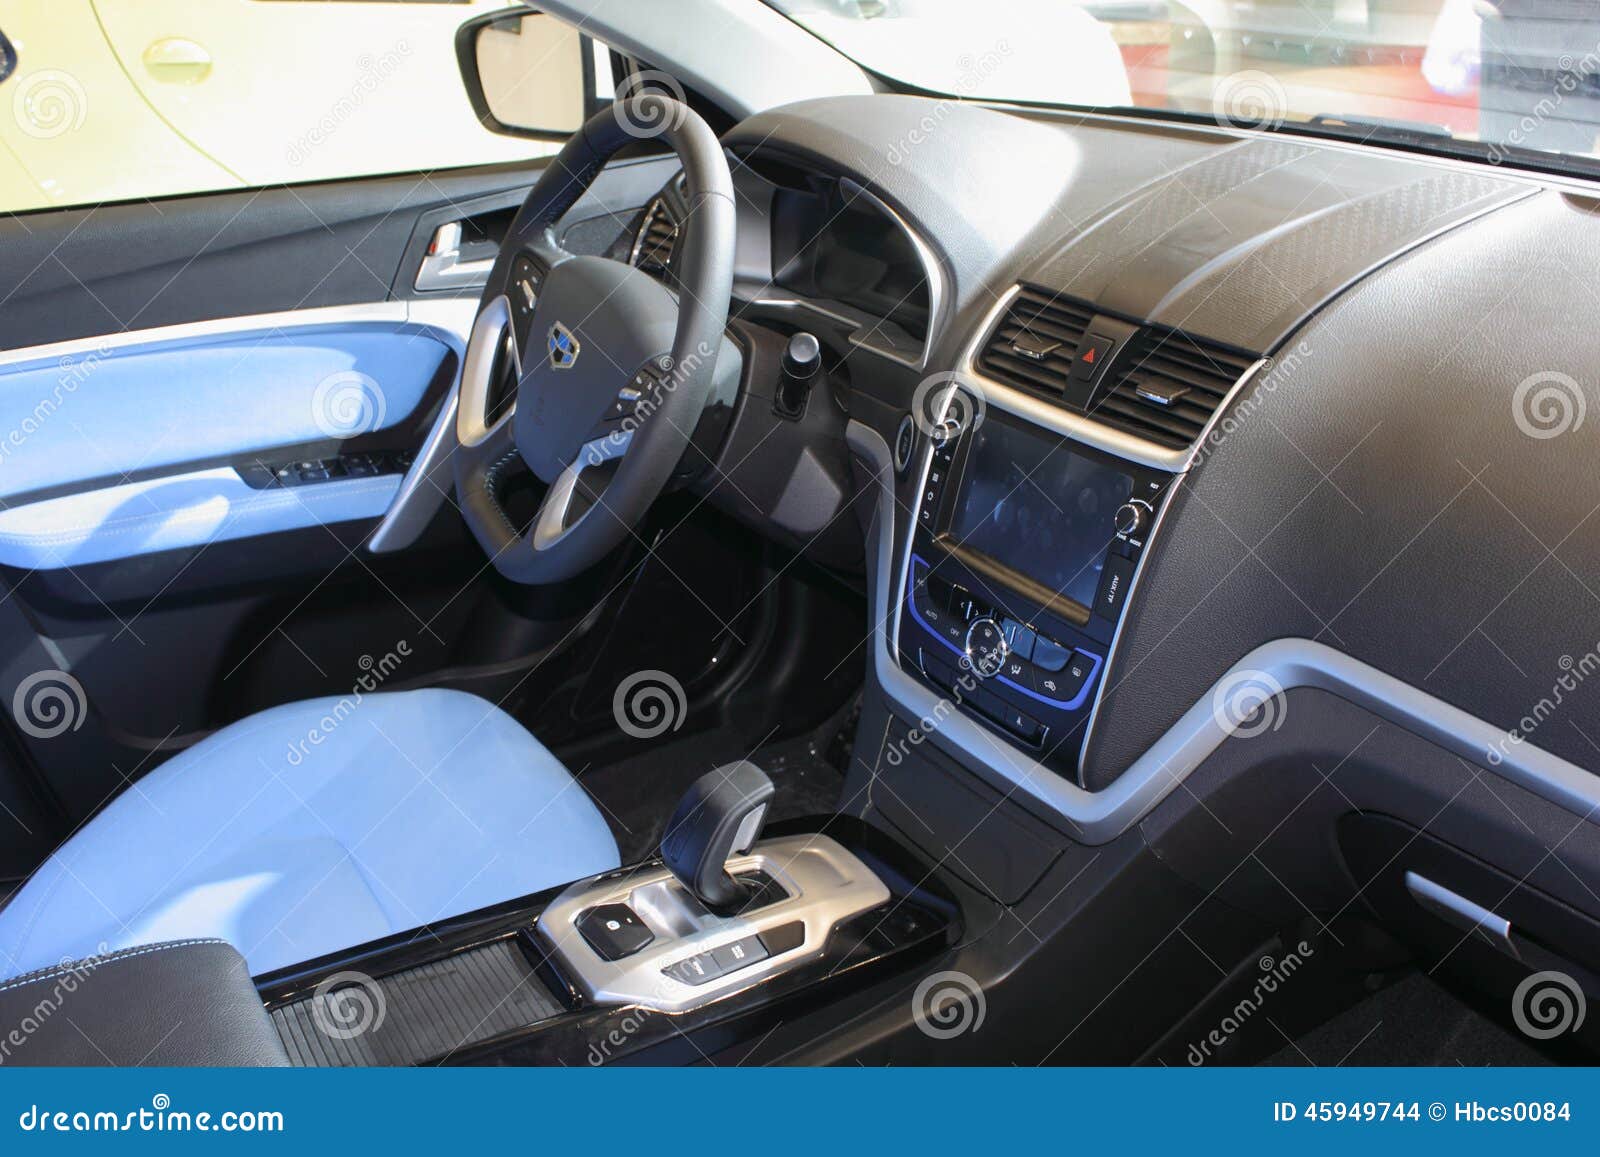 The Interior Of Geely Emgrand Pure Electric Vehicle